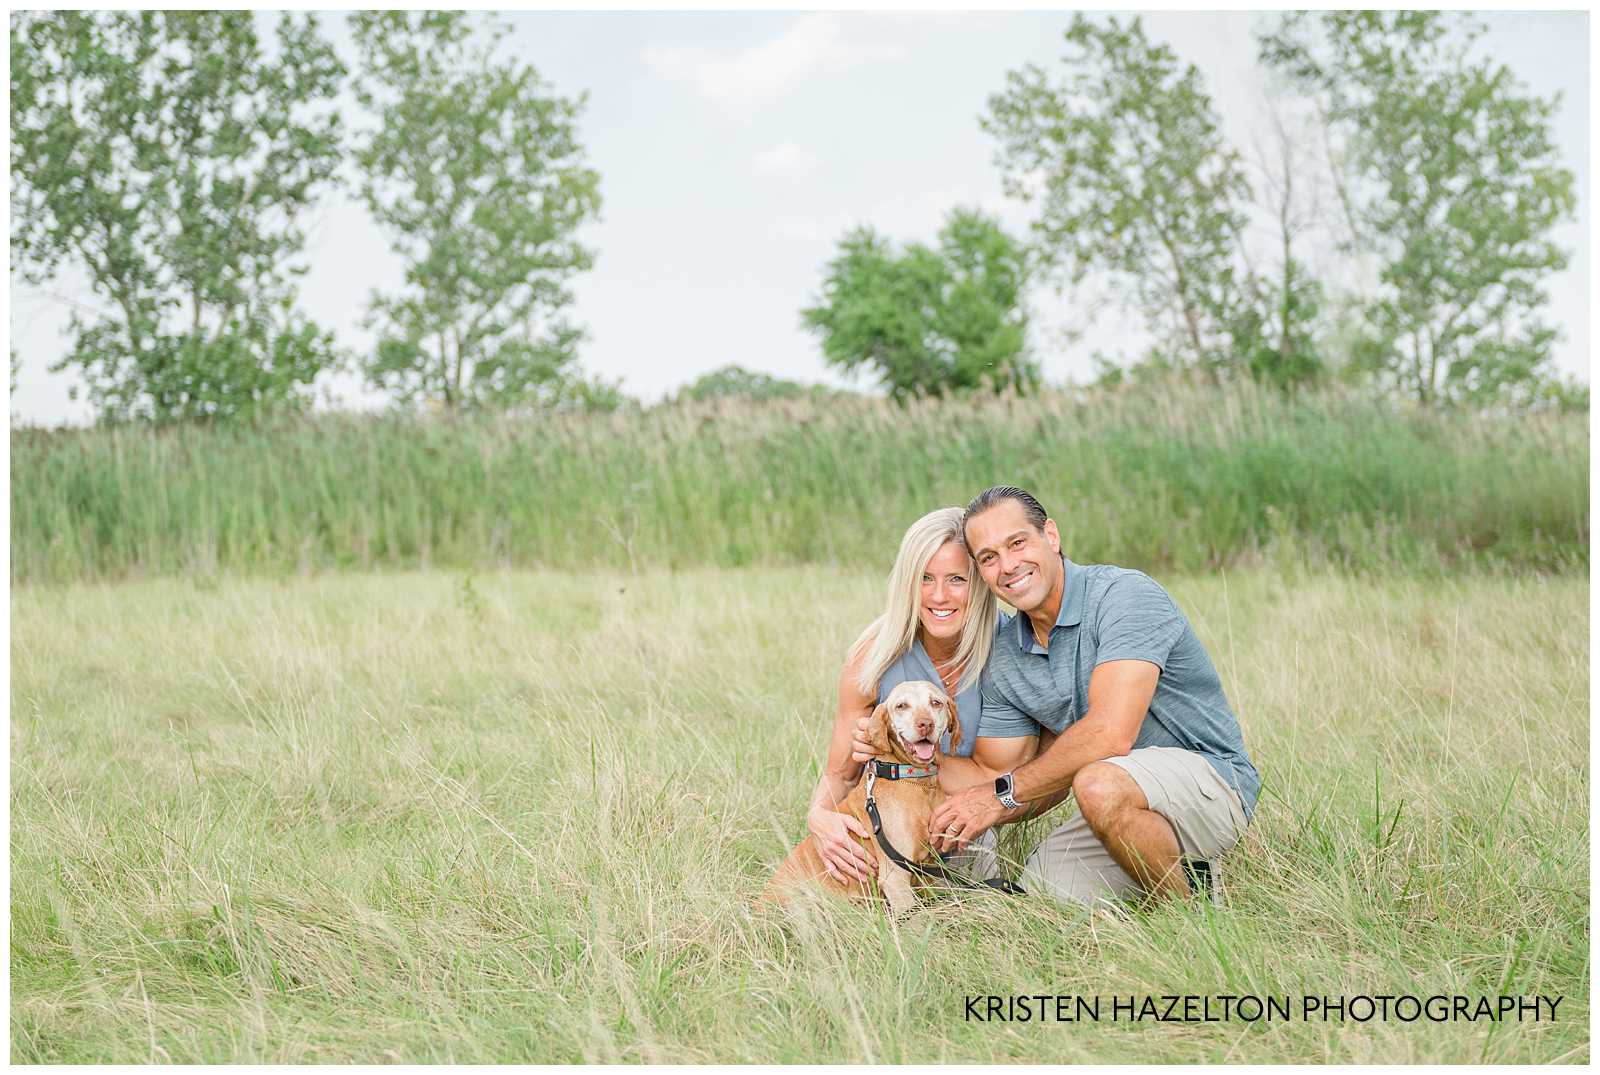 Husband and wife petting their dog in a field